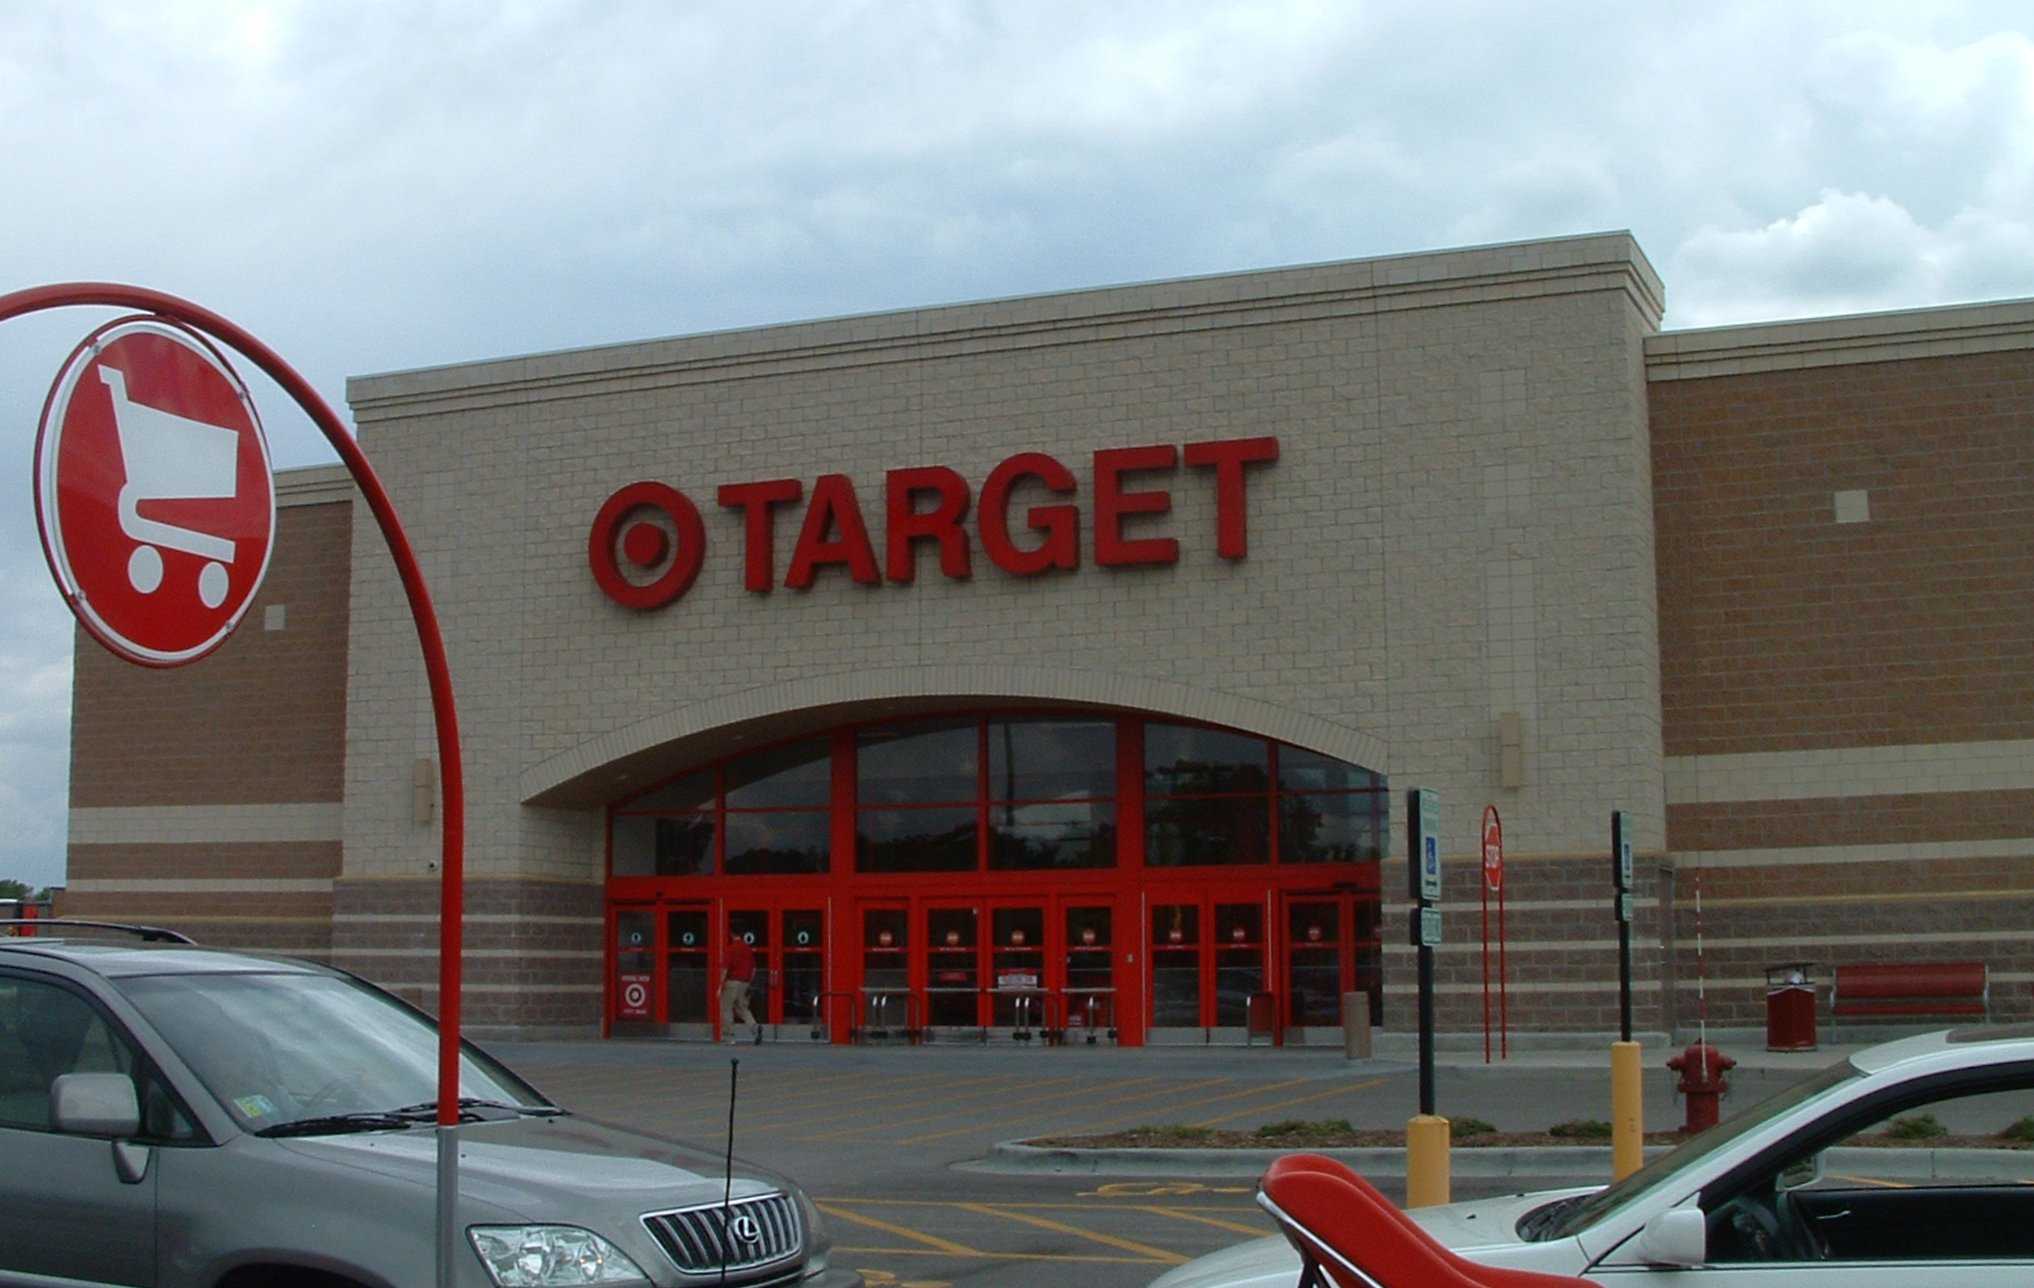 which target store is closest to me